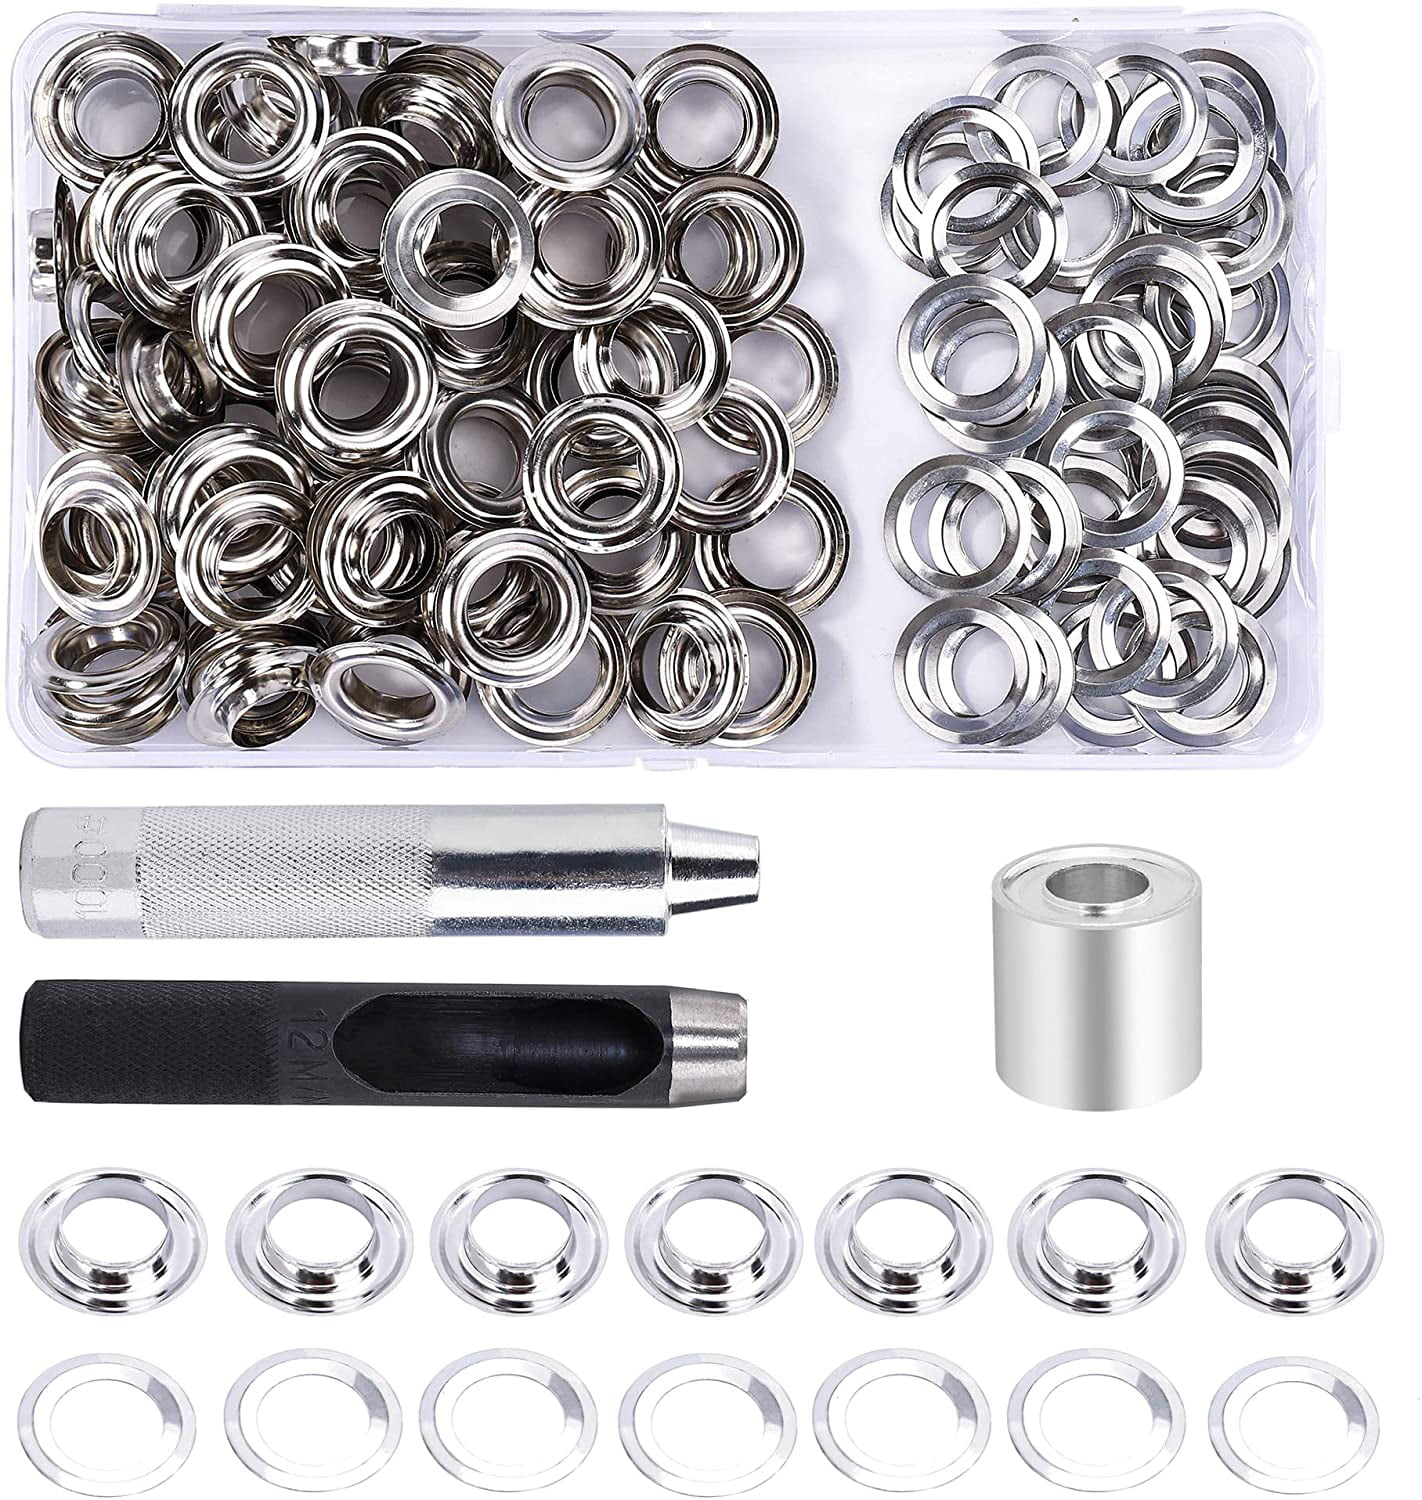 Grommet Setting Tool and 100 Sets Grommets Eyelets with Storage Box etc. Crafts Projects for Repairing Canvas Patioer Grommet Tool Kit Clothing Tents and Pool coverings 1/2 Inch Inside Diameter Diverse Combinations 